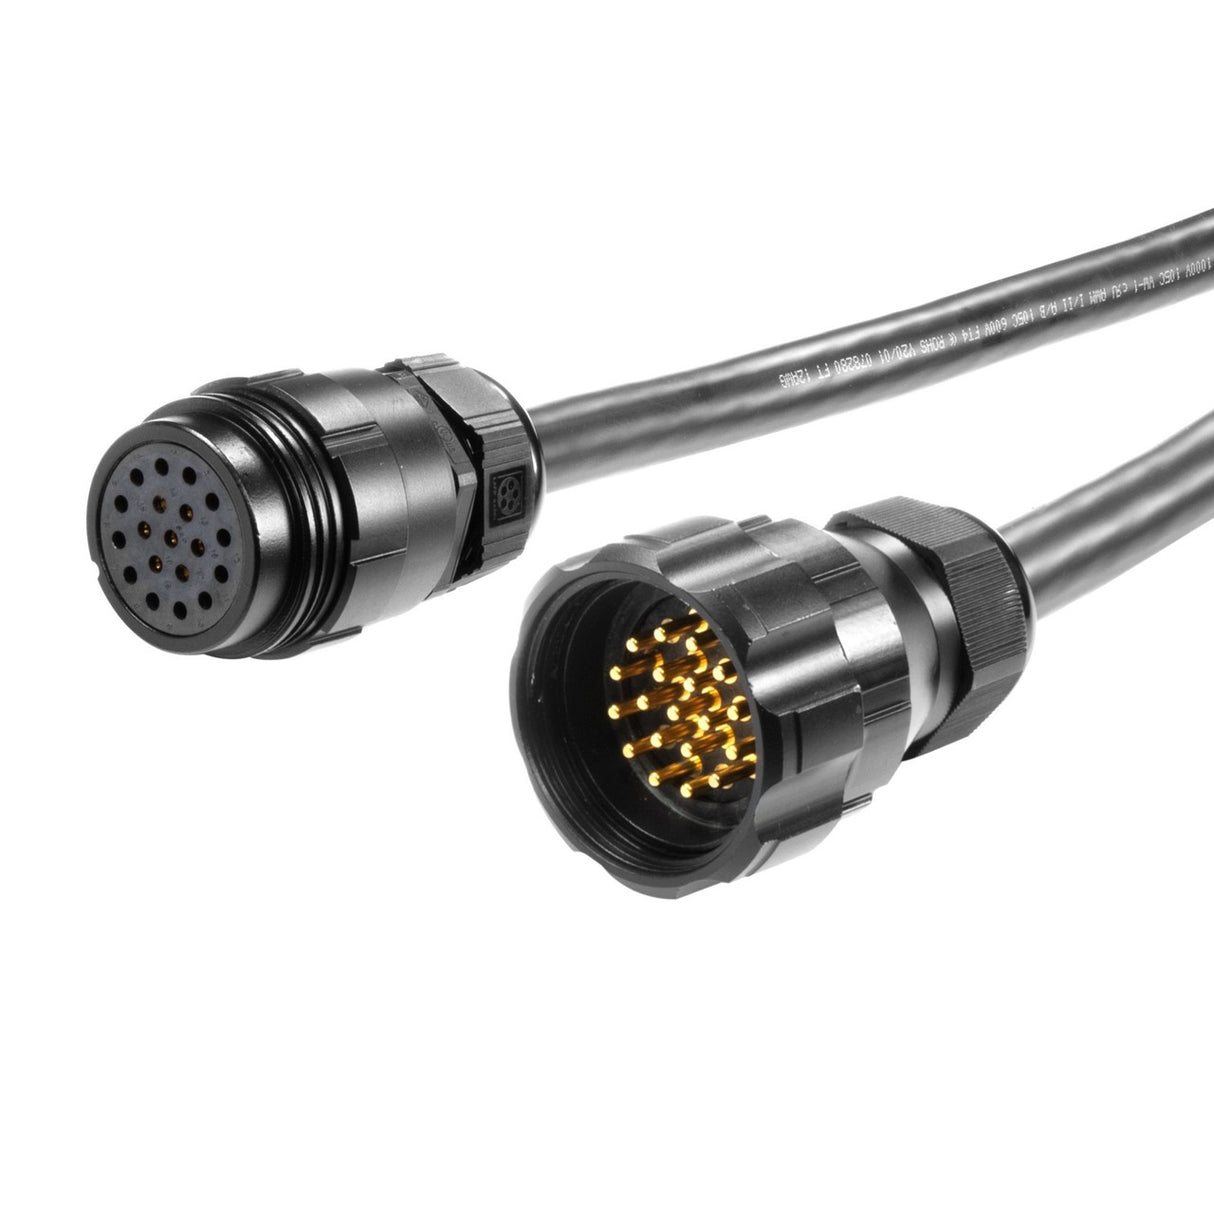 Elite Core 19 Pin Soco Extension Male to Female Lighting Power Cable with CEEP Connector, 30 Foot